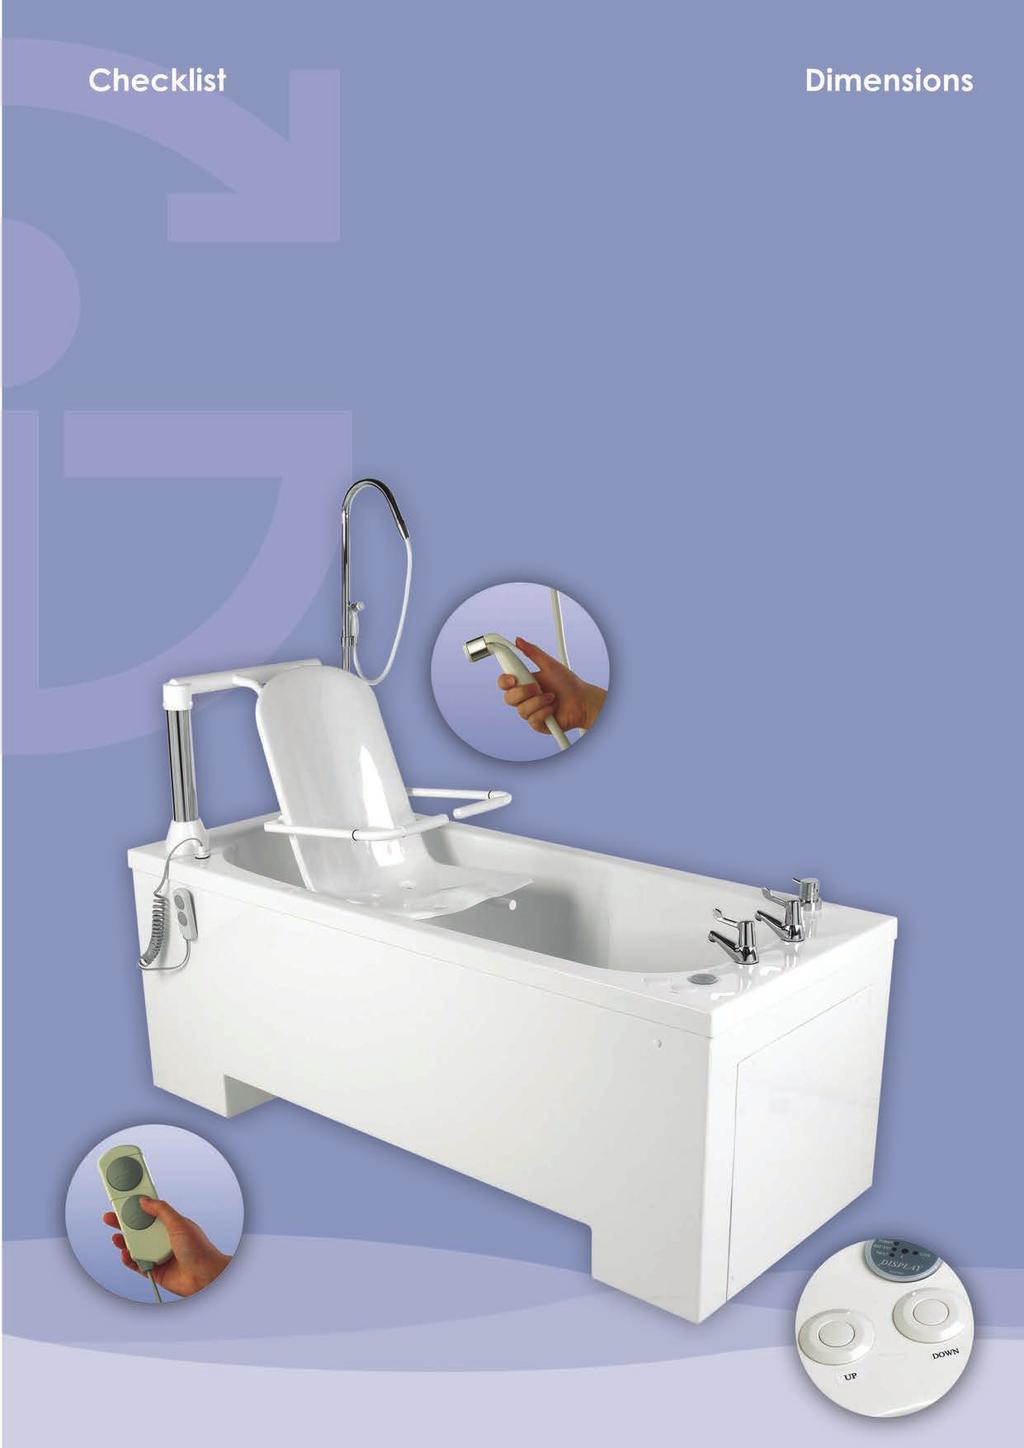 Fully adjustable hi-lo transfer bath 1800mm bath length Battery back-up as standard 24 stone (150kg) safe lifting weight 22 stone (139.